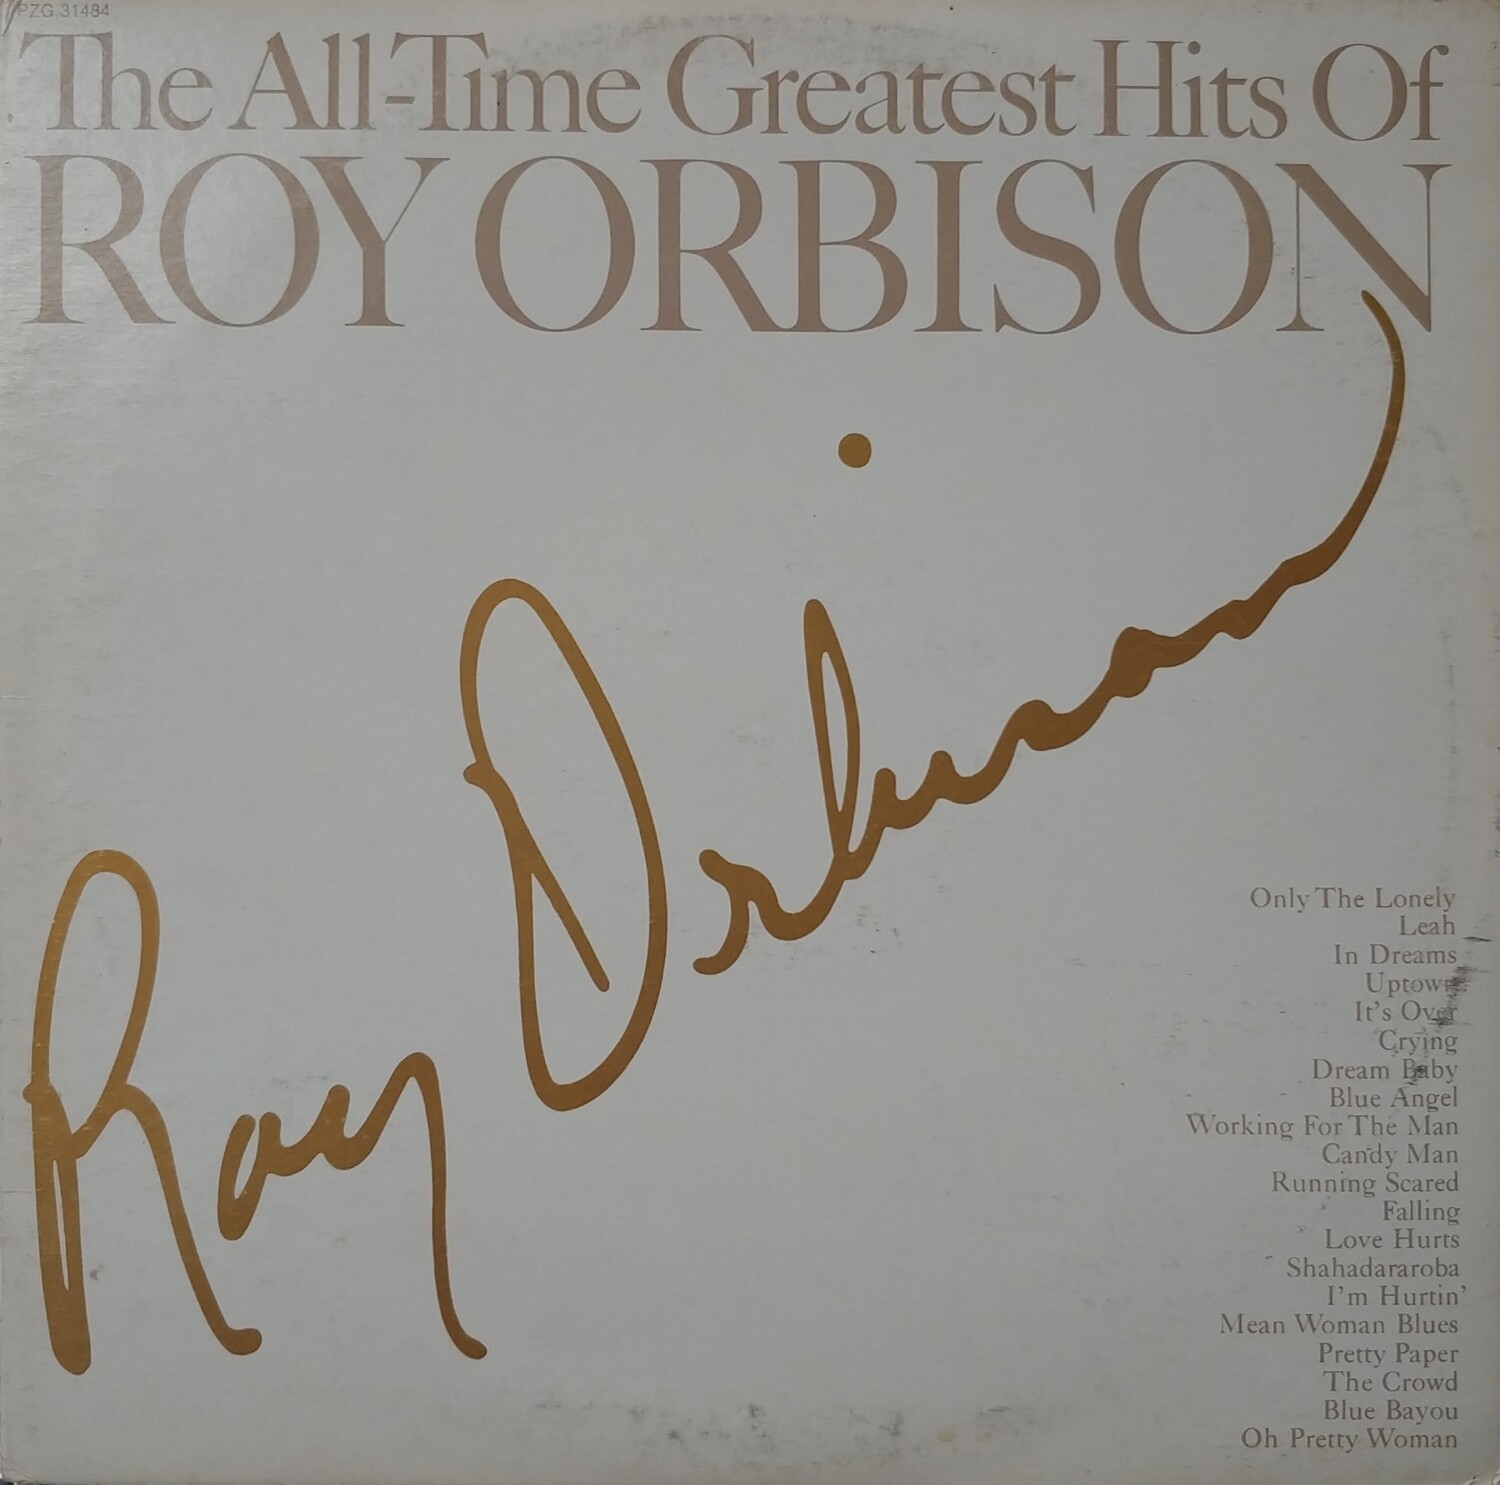 Roy Orbison - The All-time Greatest Hits of Roy Orbison